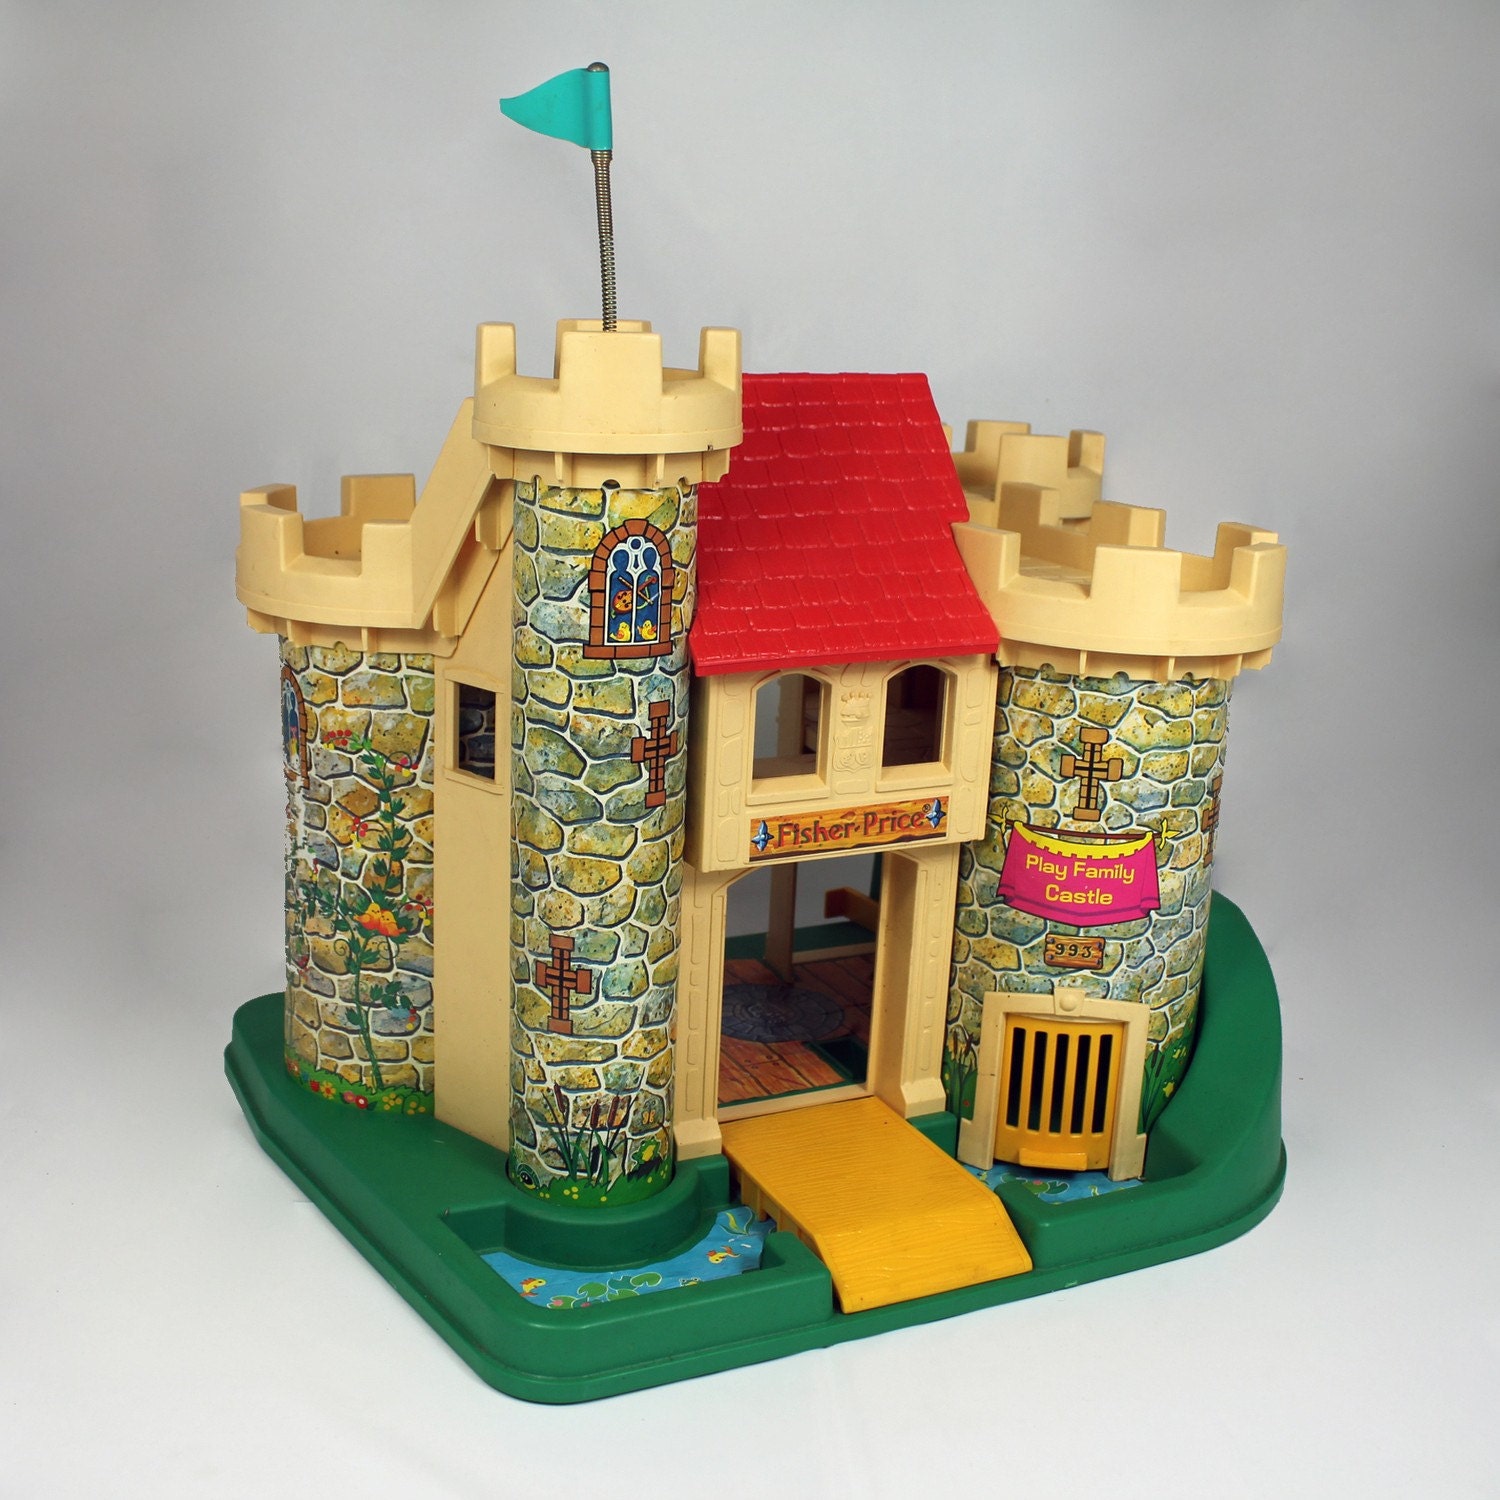 1974 FISHER PRICE 993 Play Family Castle